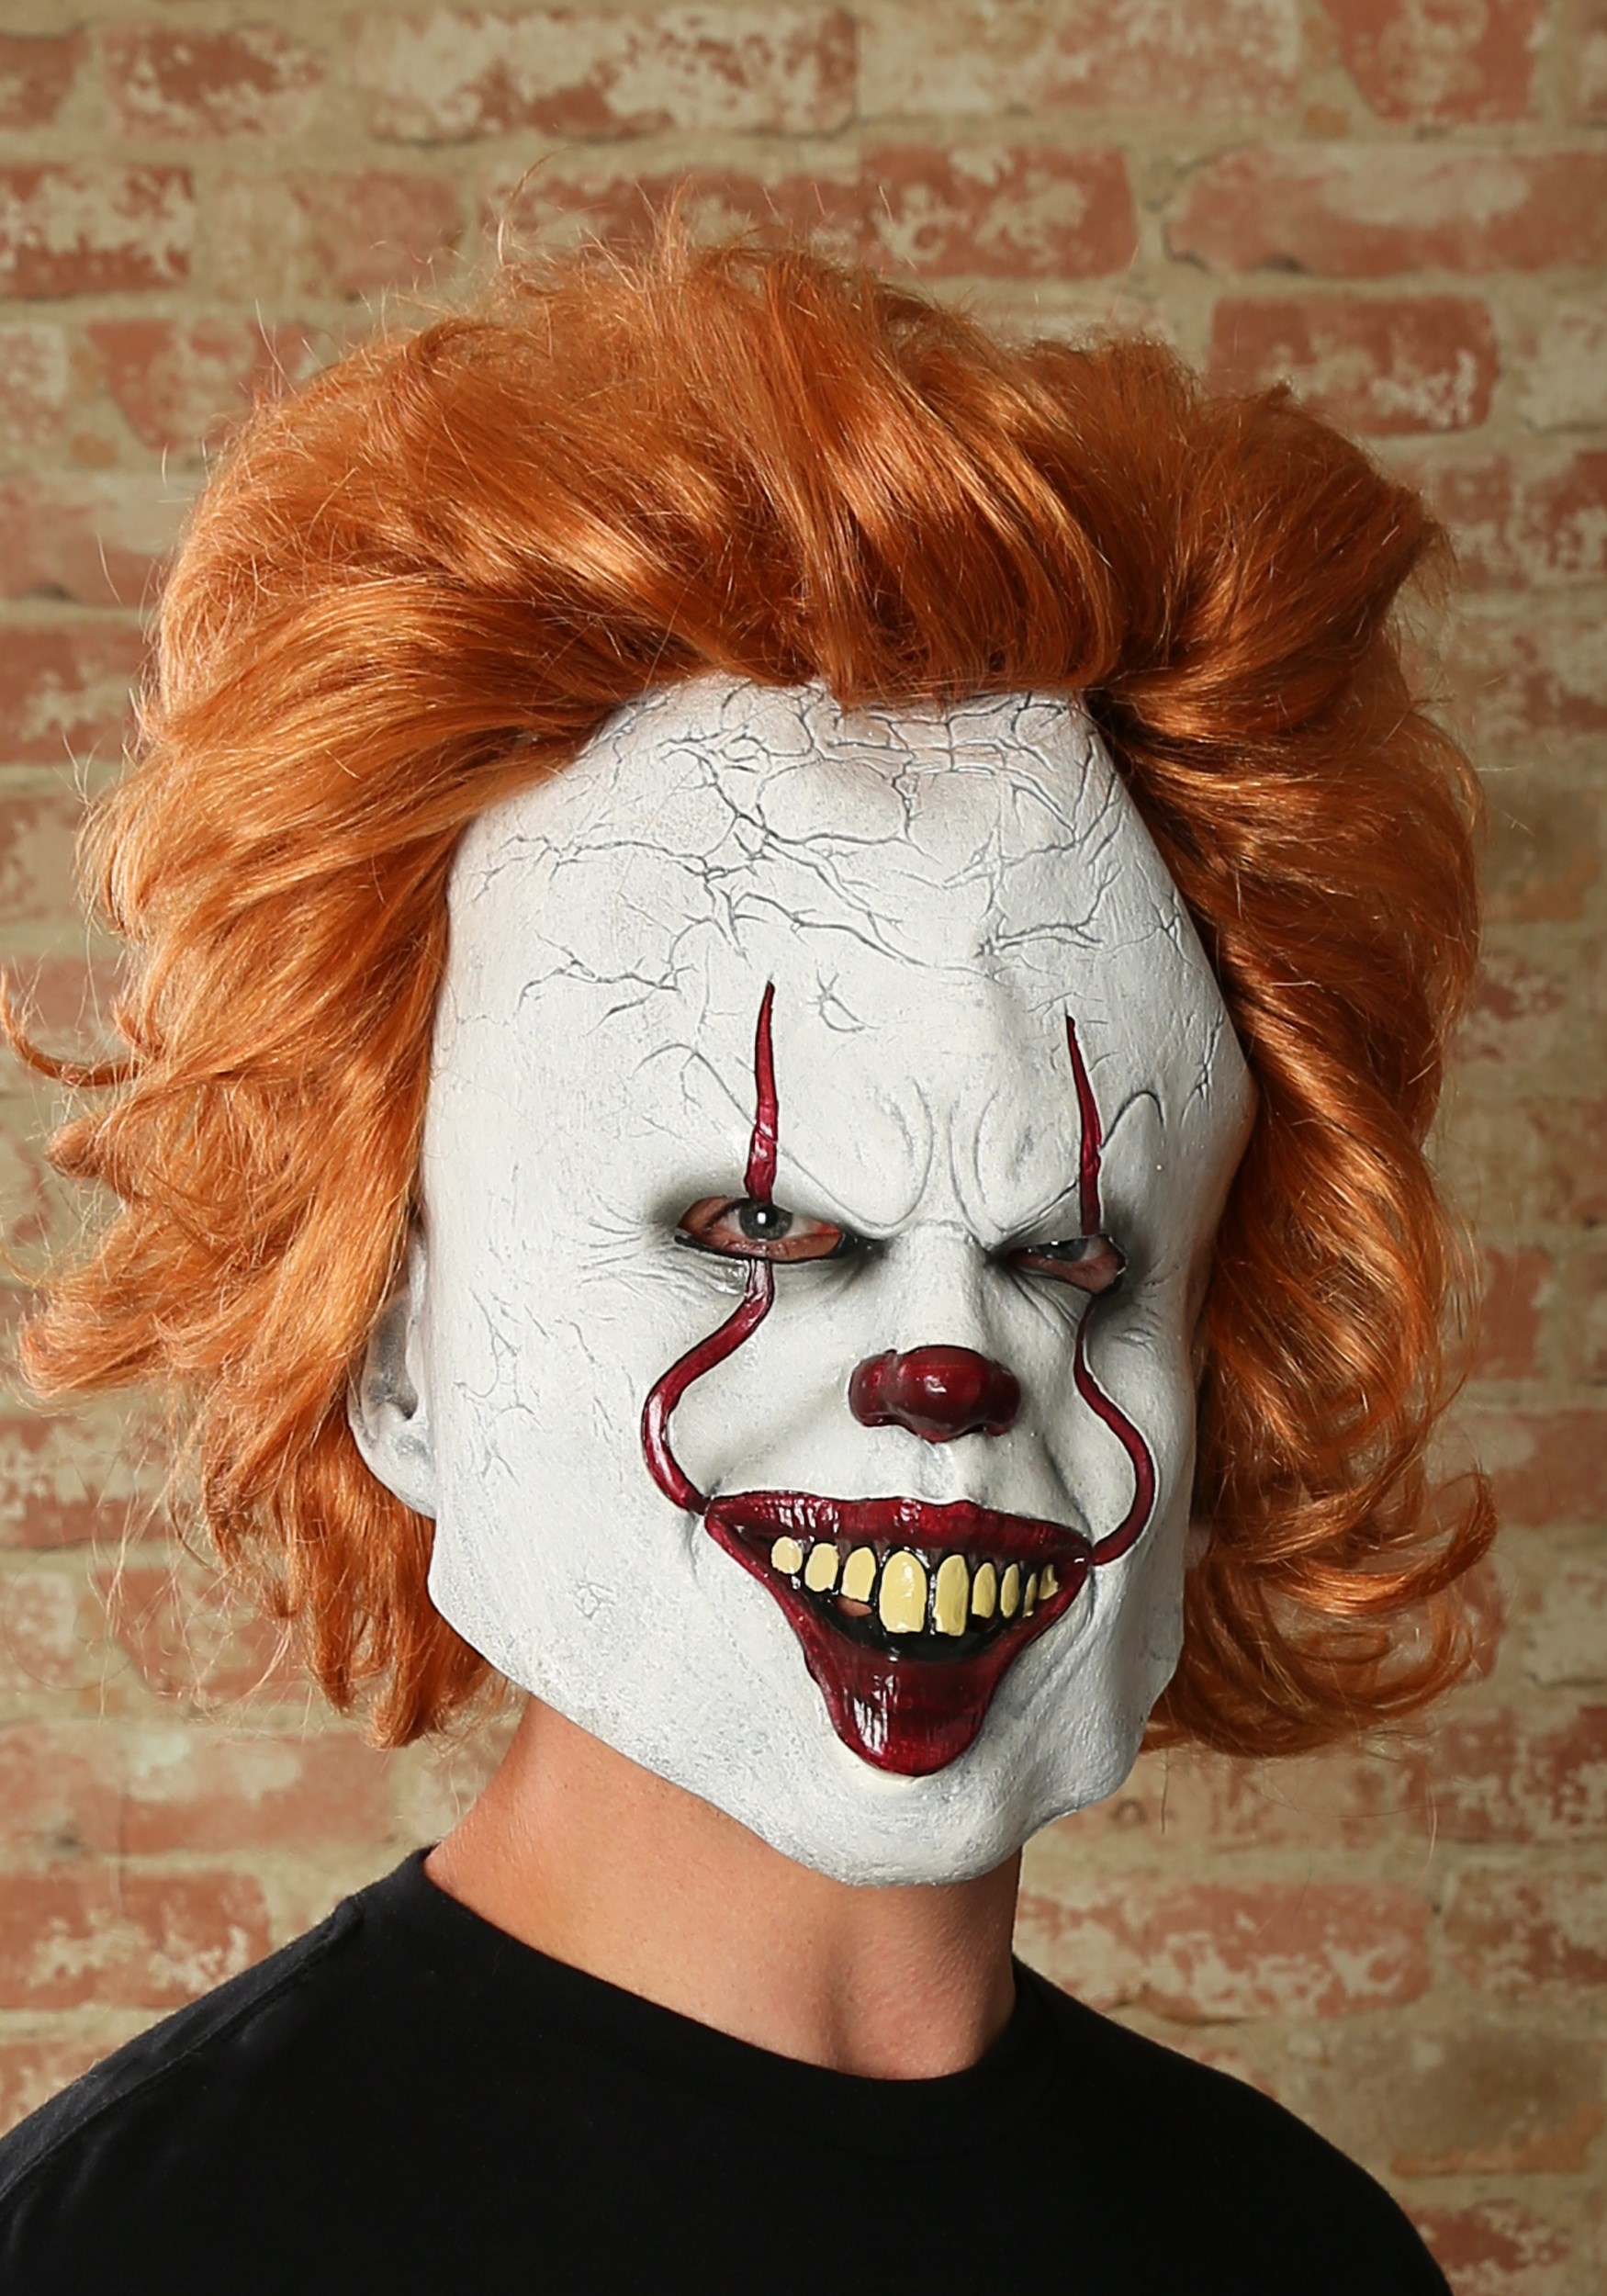 IT Movie Pennywise Deluxe Mask for Adults
